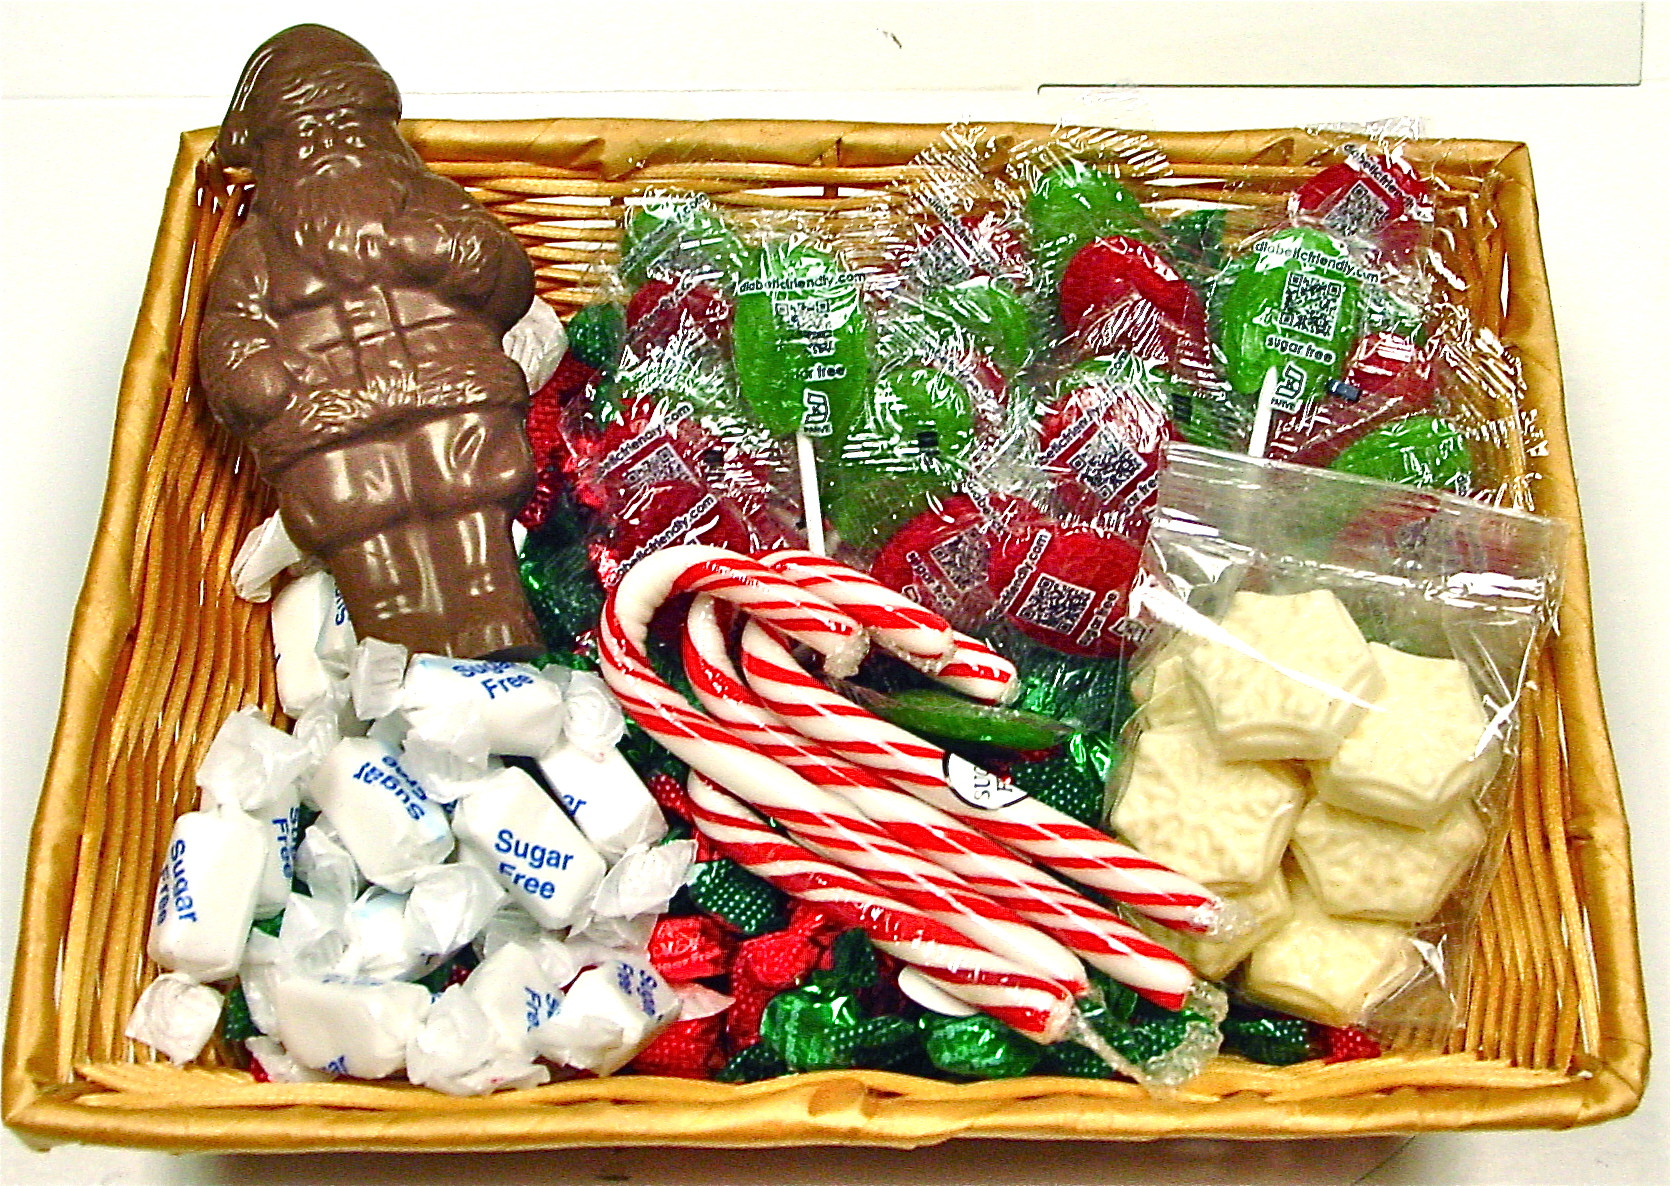 Sugar Free Christmas Candy
 Sugar Free Christmas Gift Basket Contains Candy